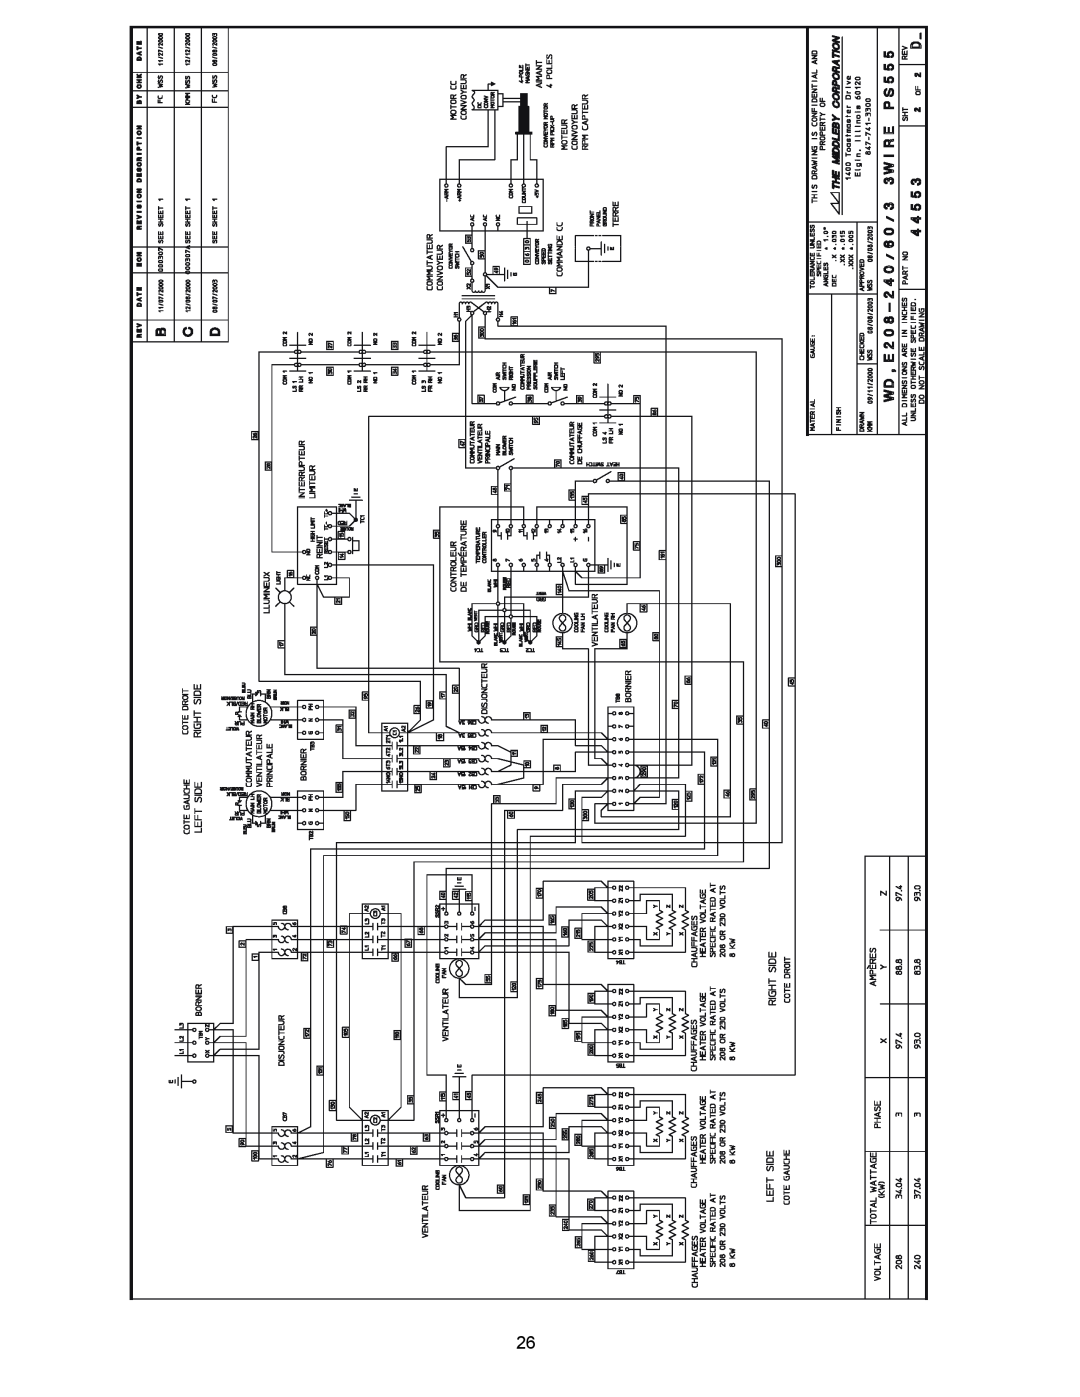 Middleby Marshall PS555 manual WIRING DIAGRAM US 208/240V 44553D 26PHASE SHEET 